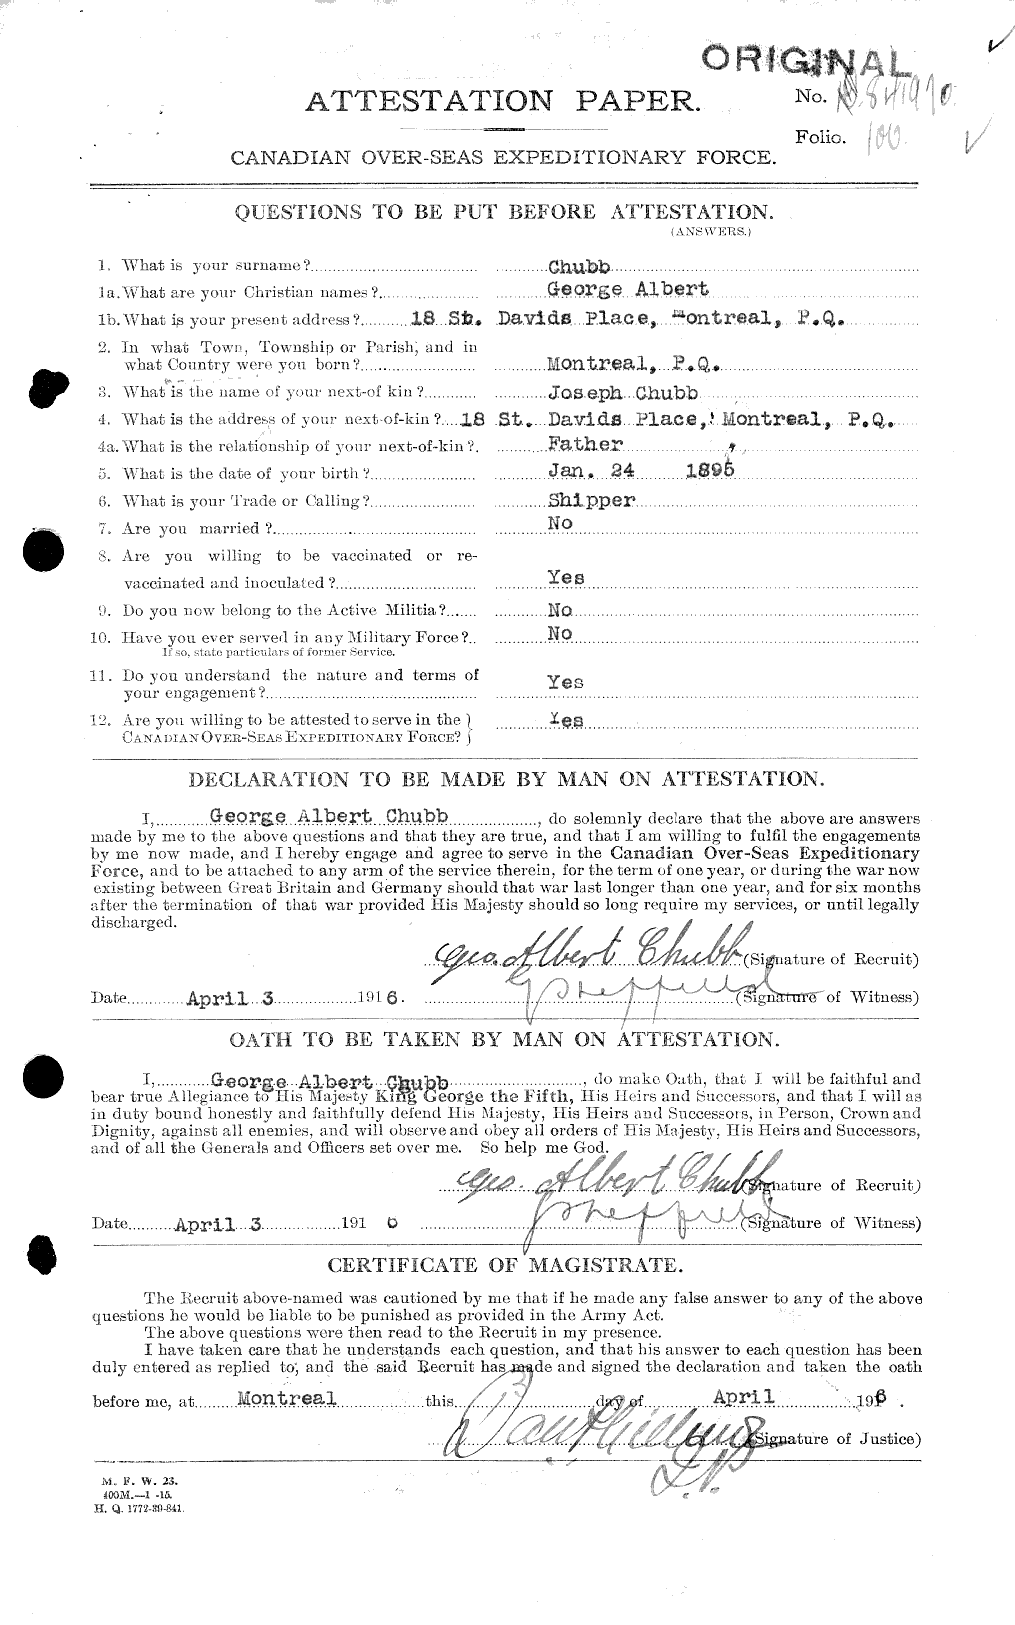 Personnel Records of the First World War - CEF 022265a